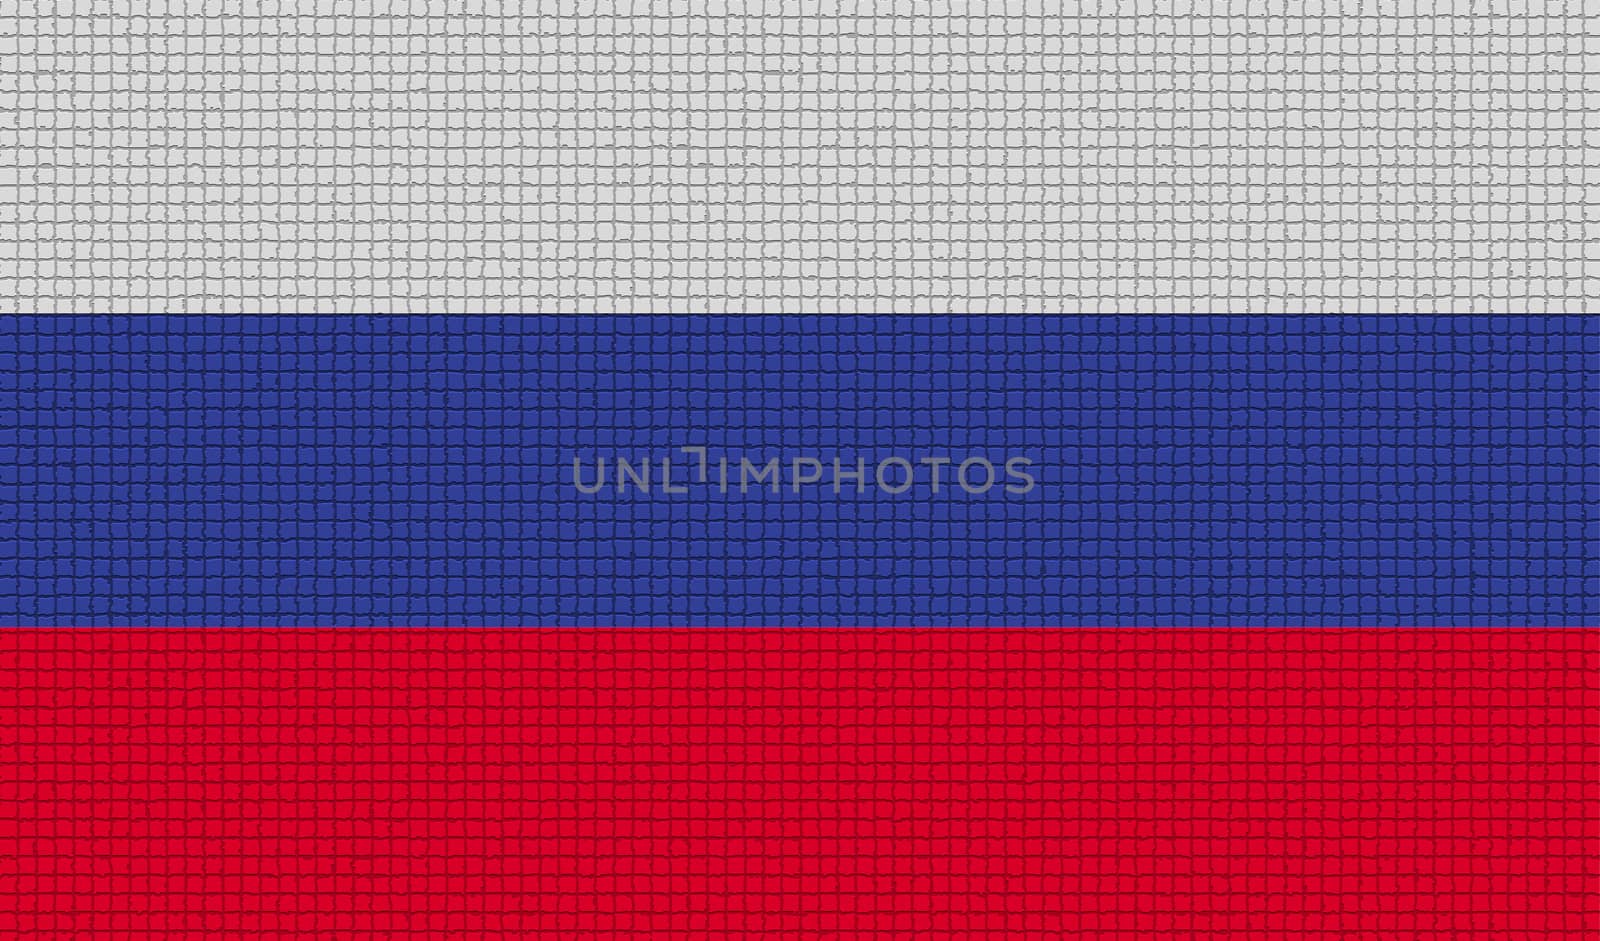 Flags of Russia with abstract textures. Rasterized version